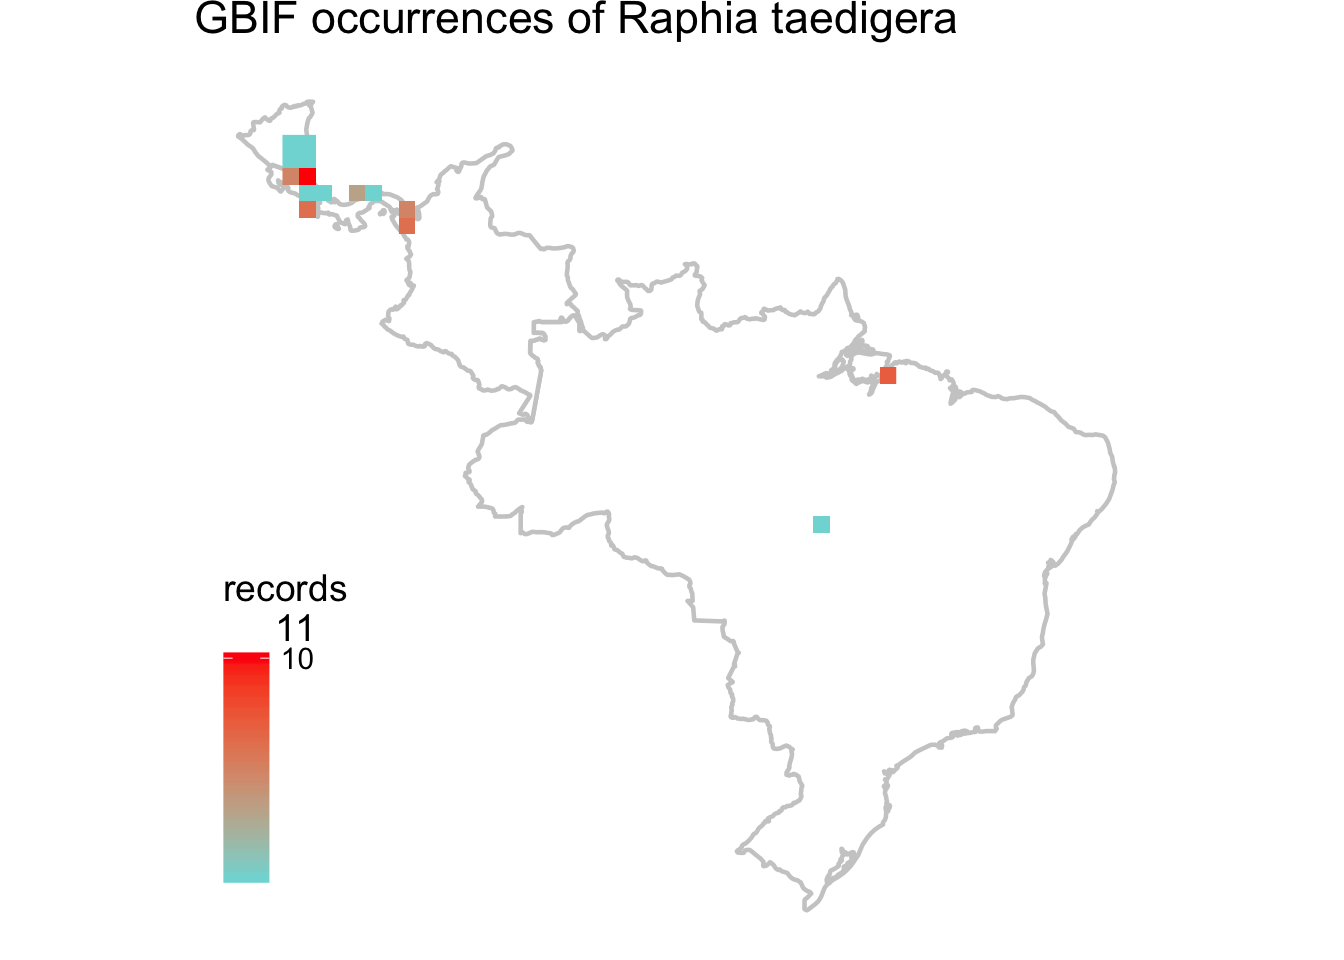 Records of Raphia taedigera present in the Global Biodiversity Information Facility